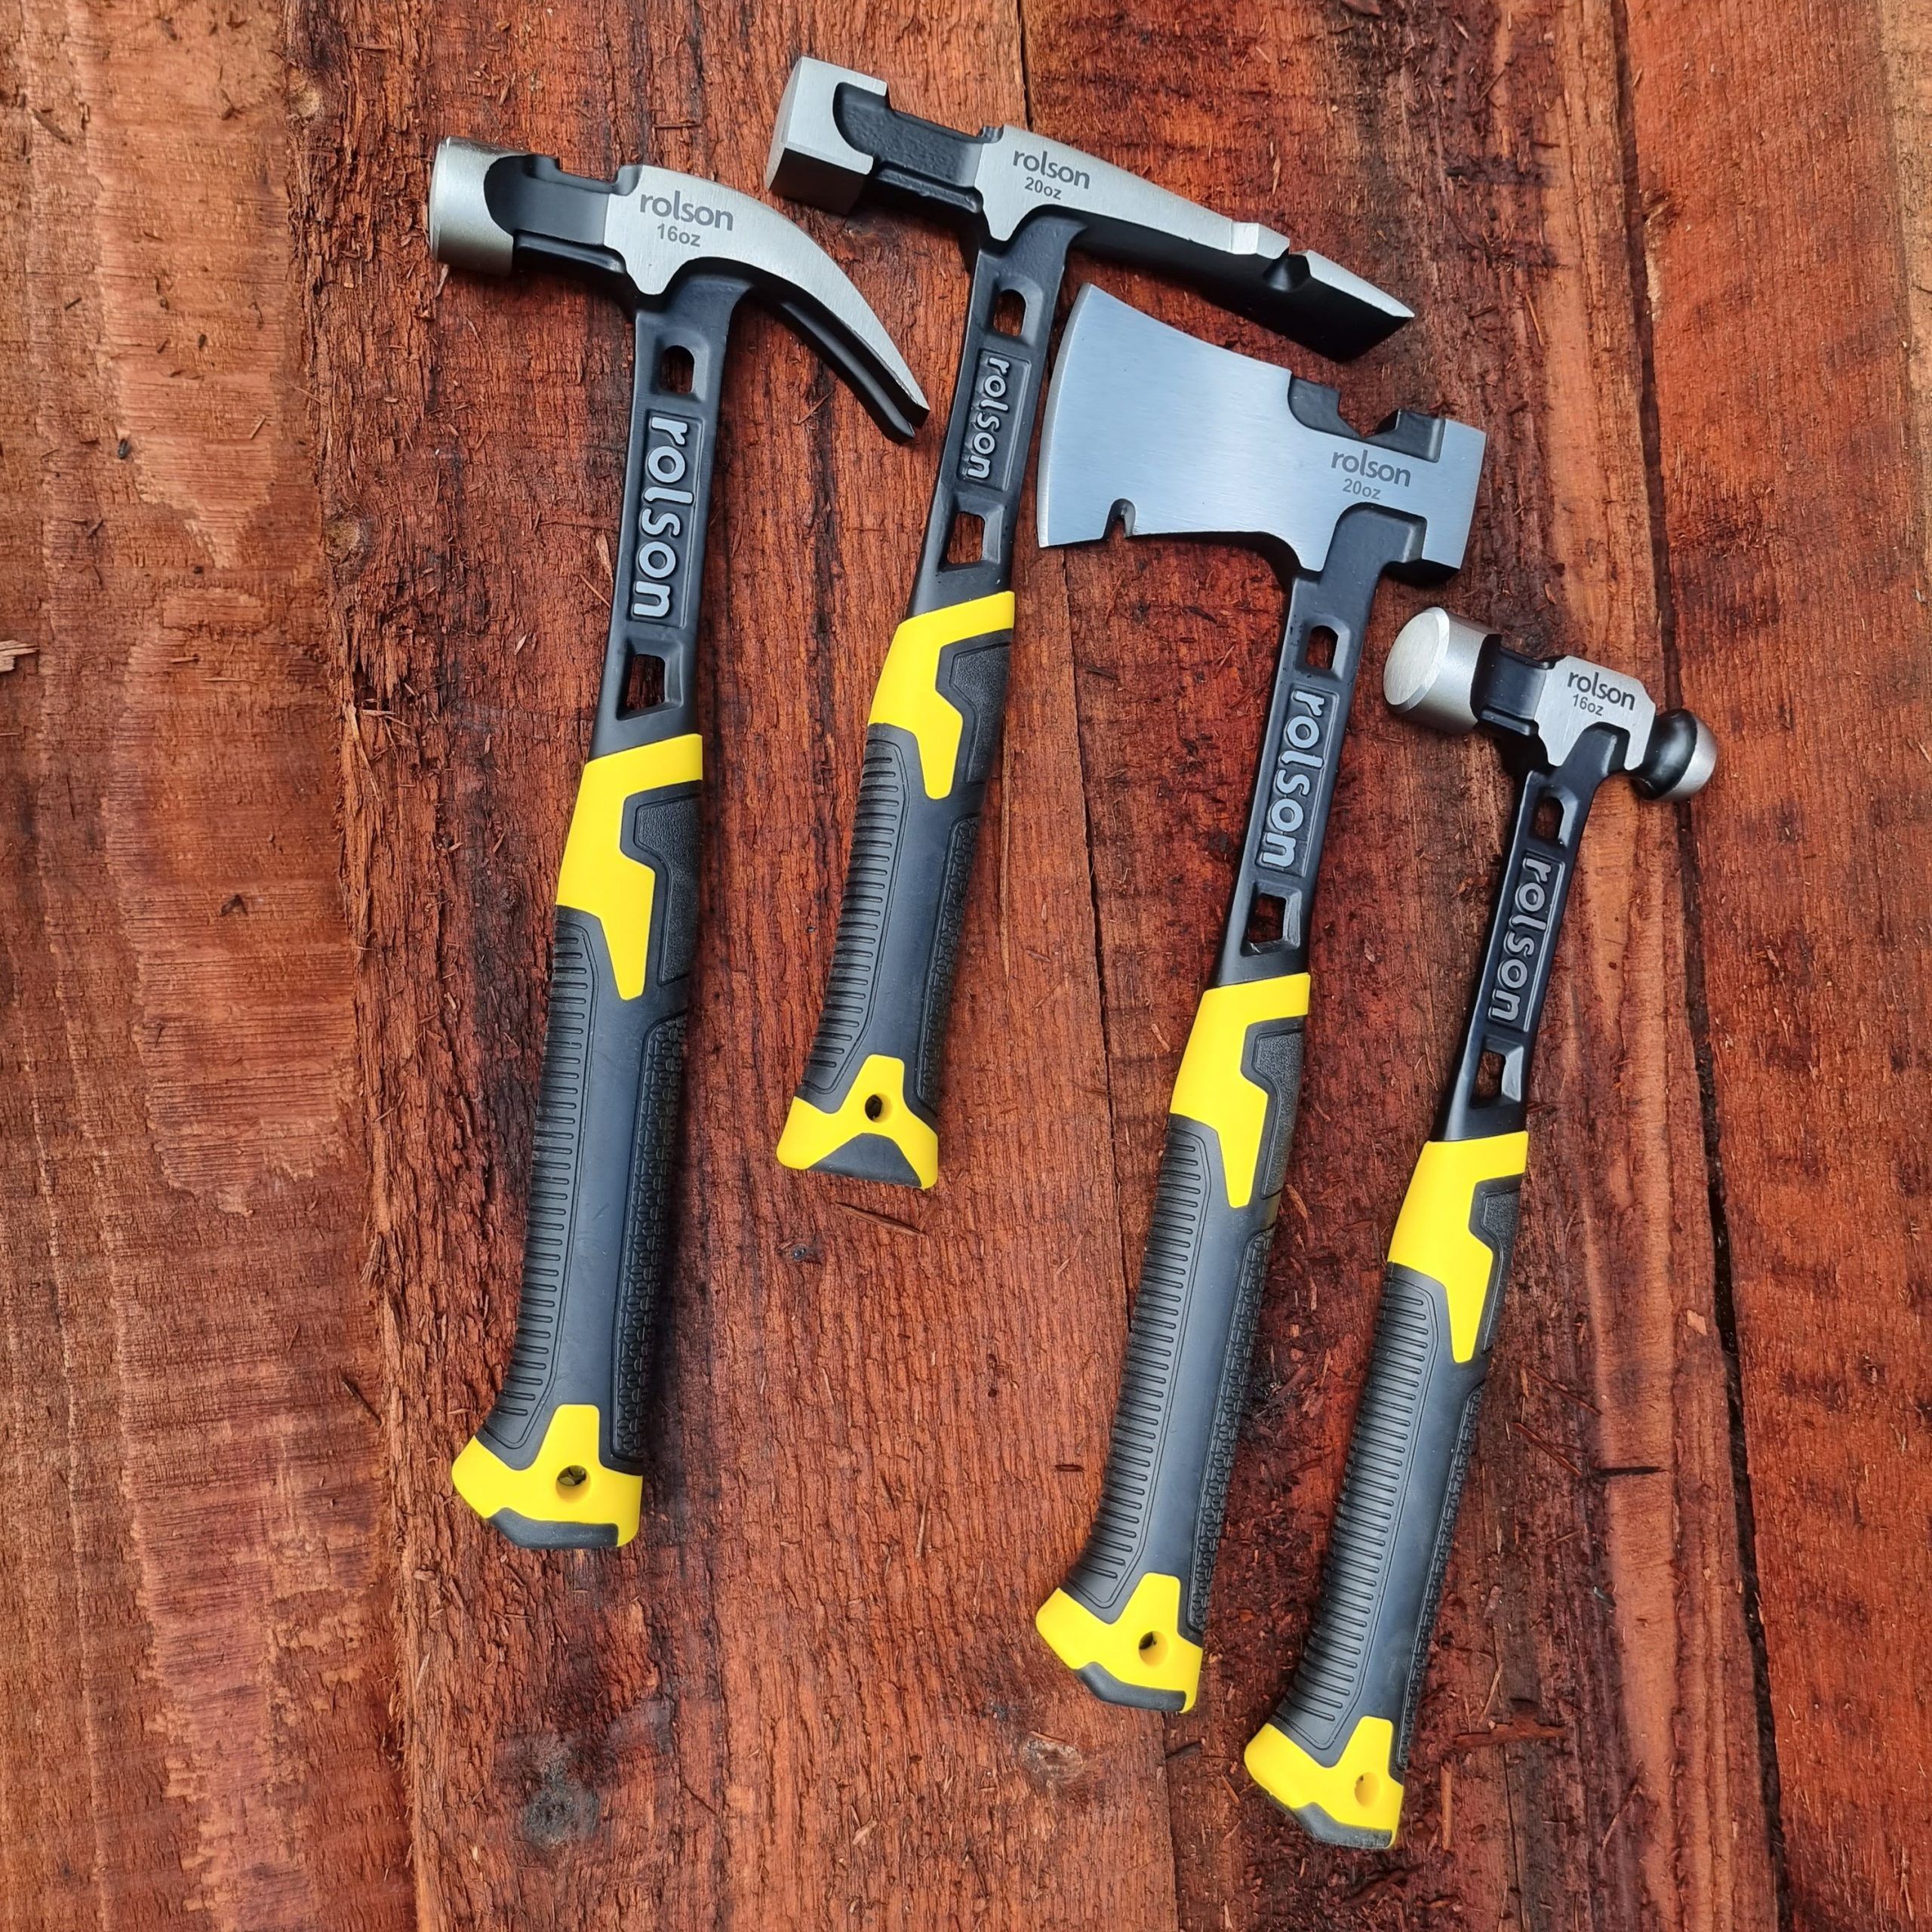 - Review Rolson Tools Range